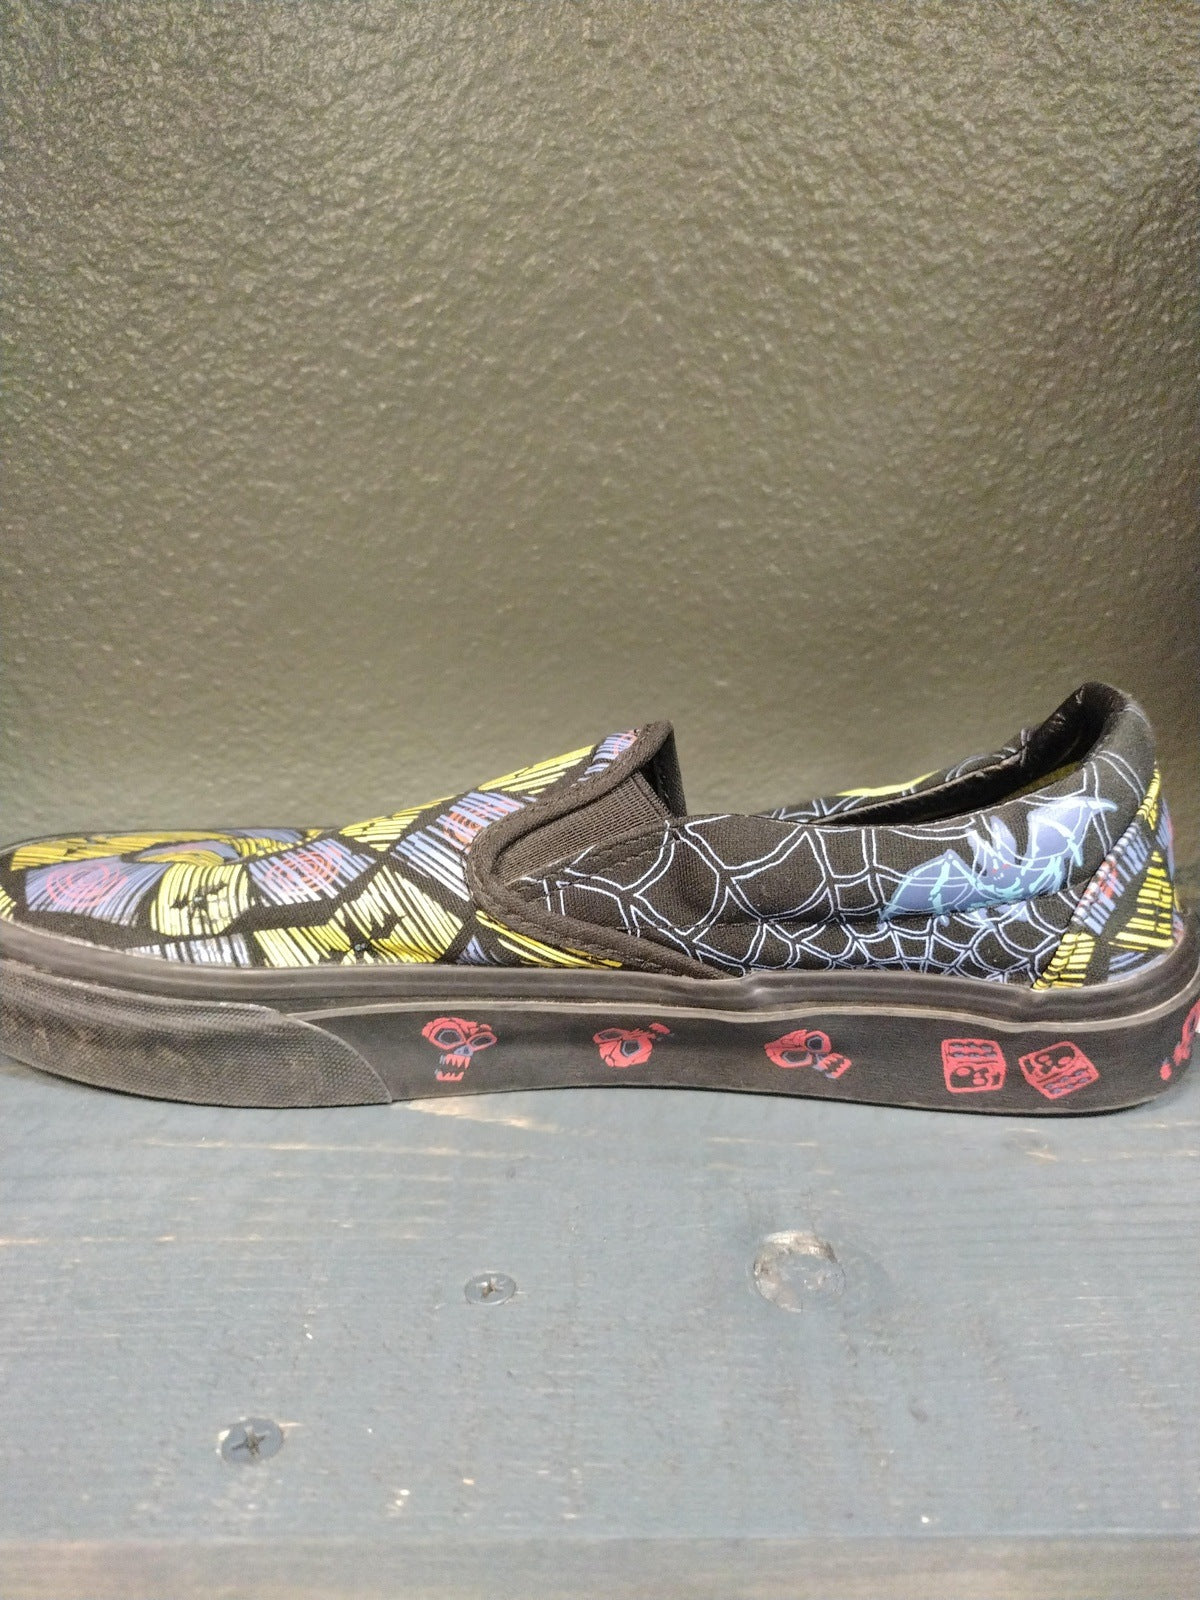 Vans Size 9.5 Nightmare Before Christmas Shoes